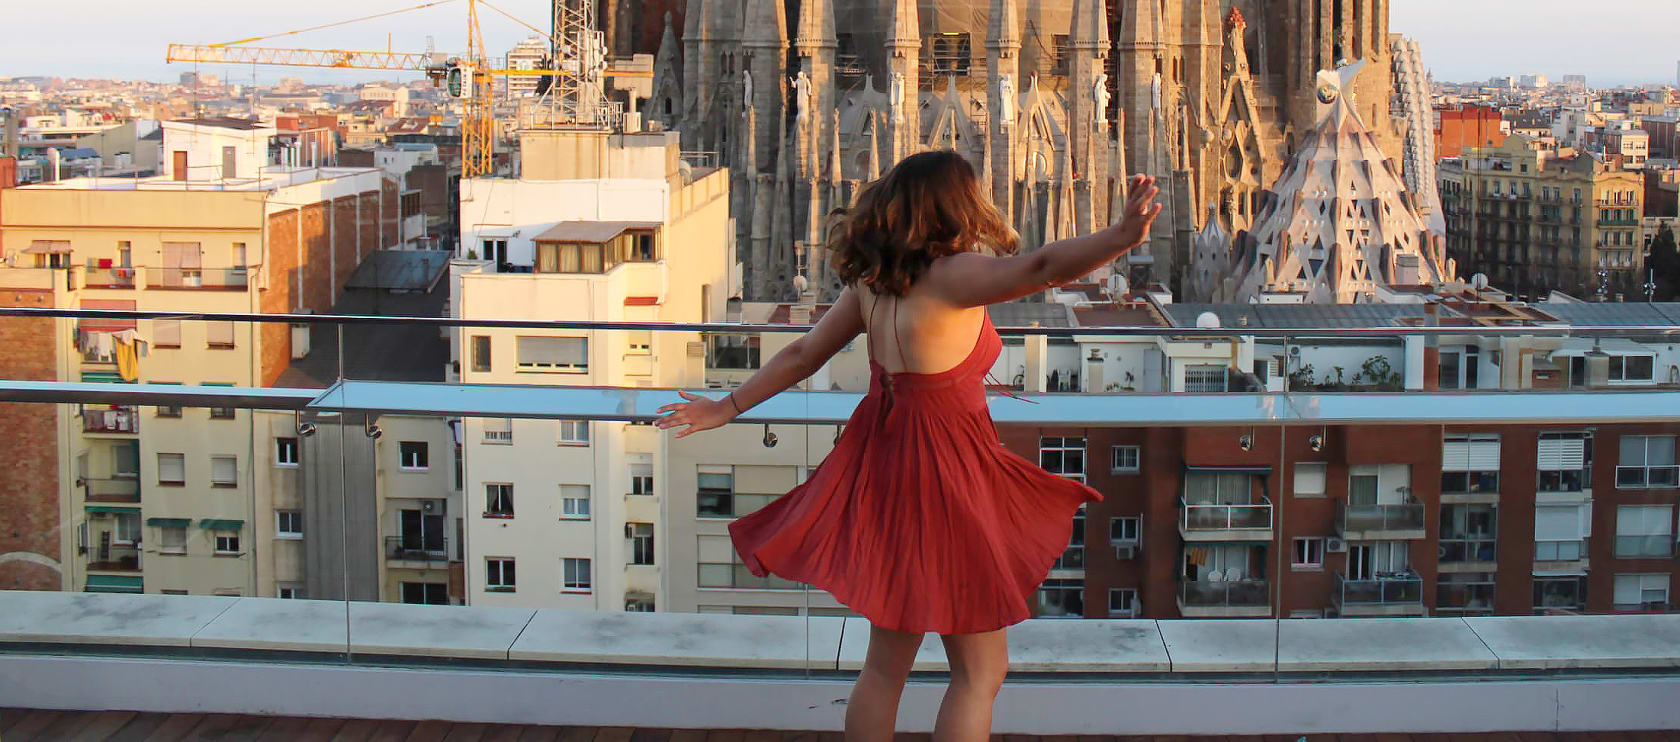 Girl in red dress dancing in front of building.